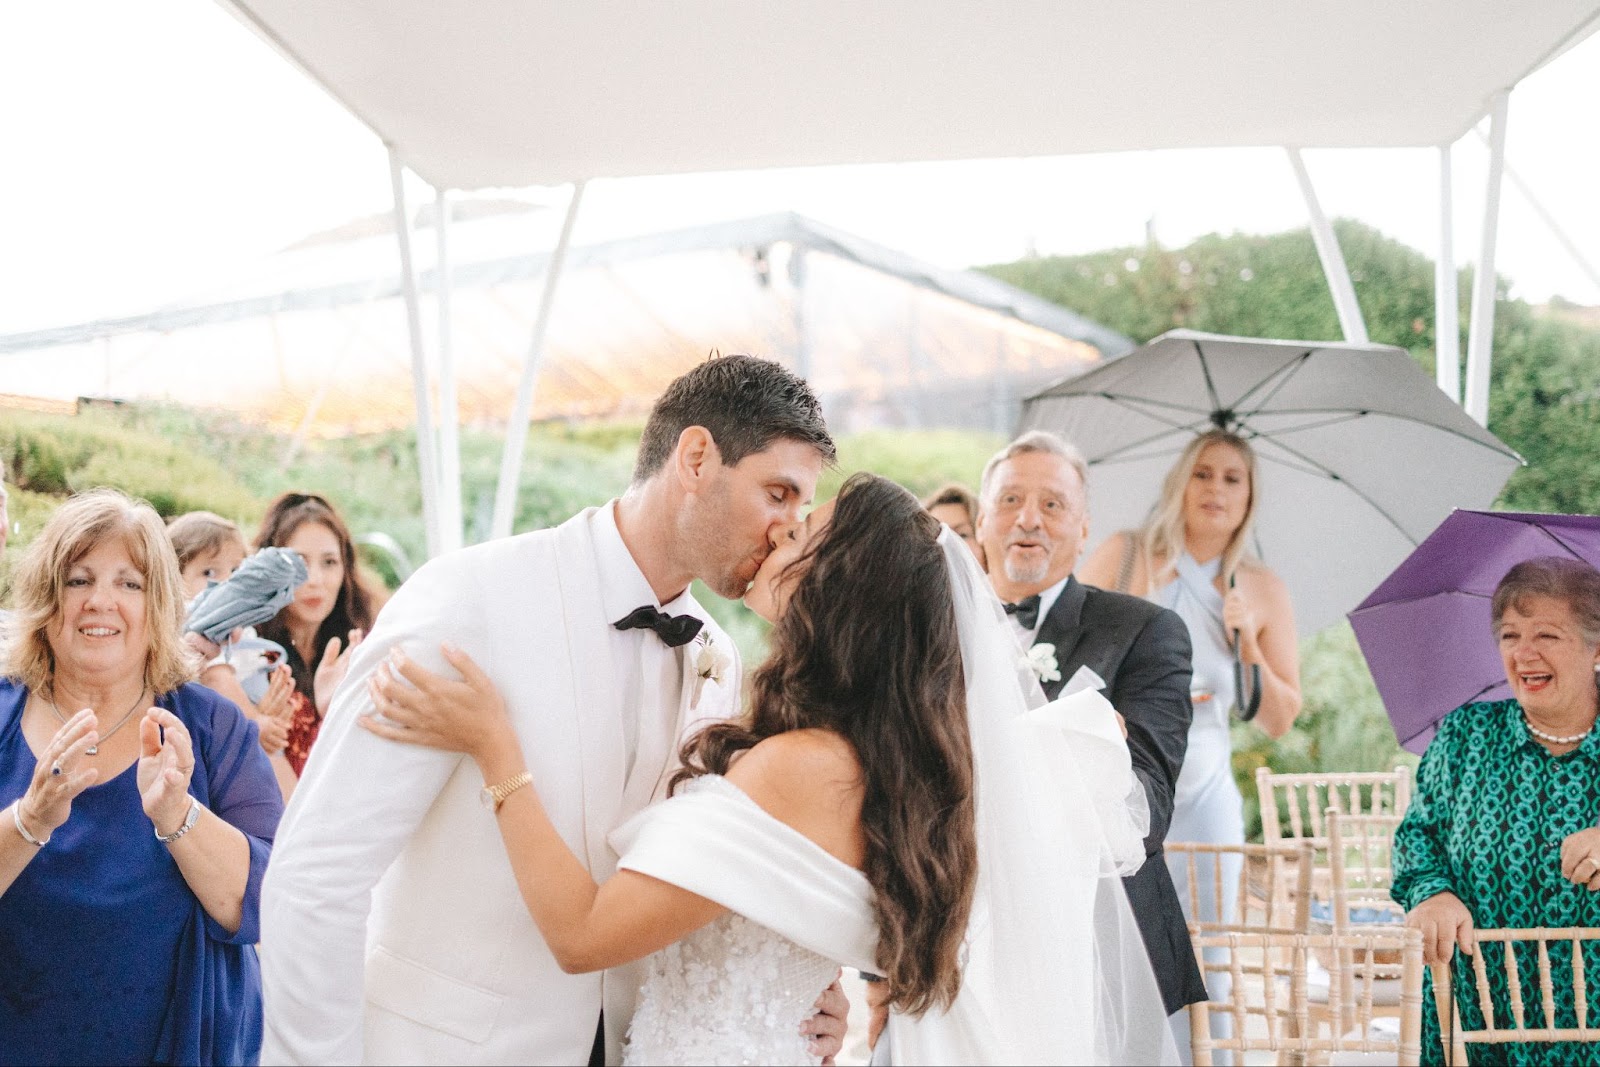 A Destination Wedding in Greece That Embraced the Unexpected Wet Weather 